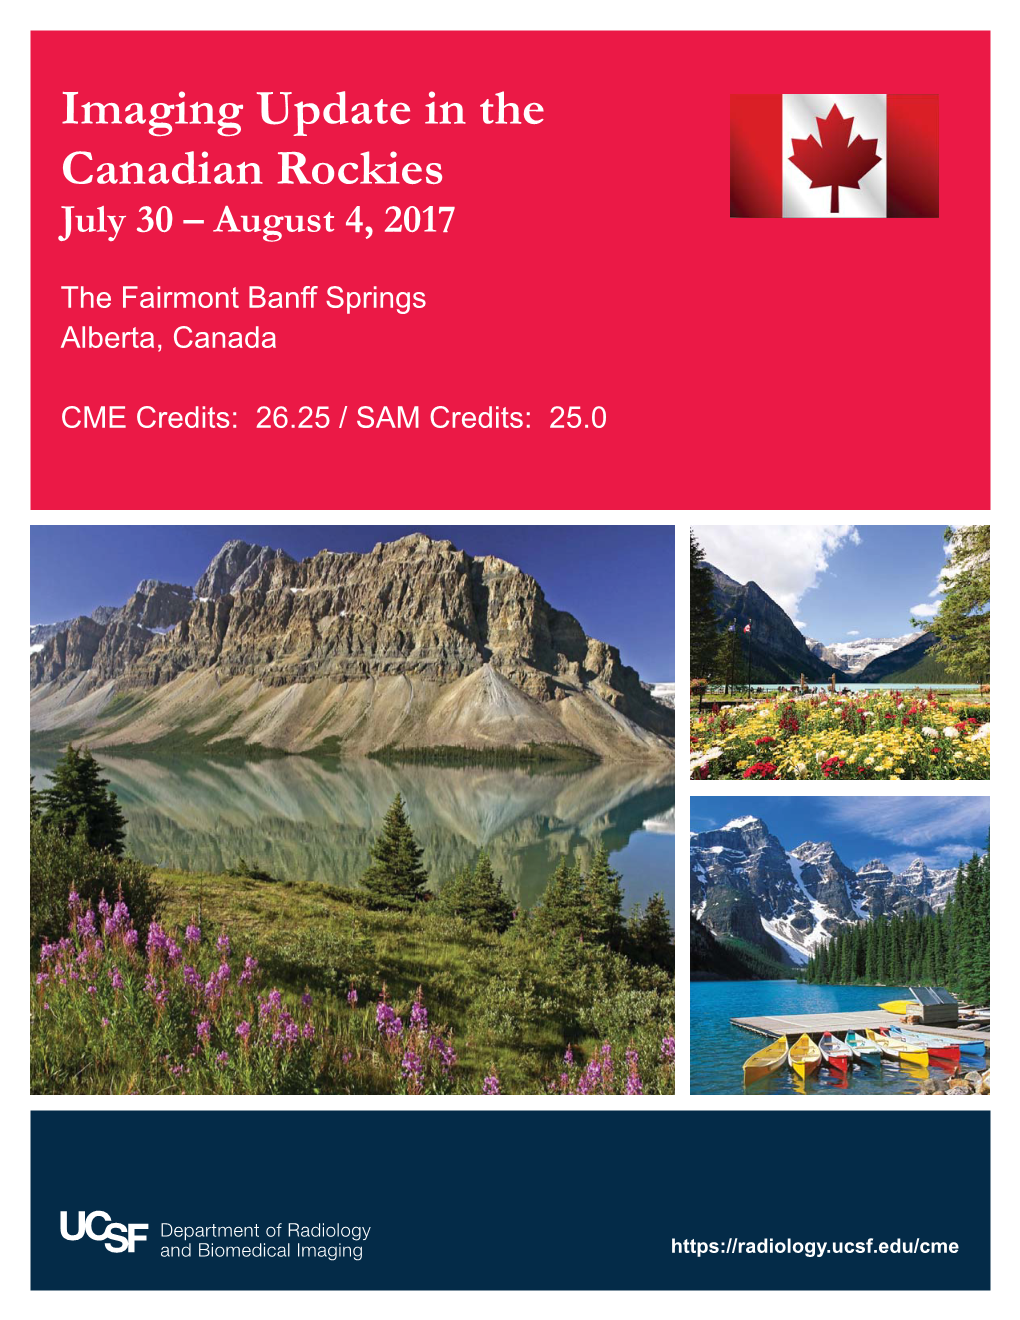 Imaging Update in the Canadian Rockies July 30 – August 4, 2017